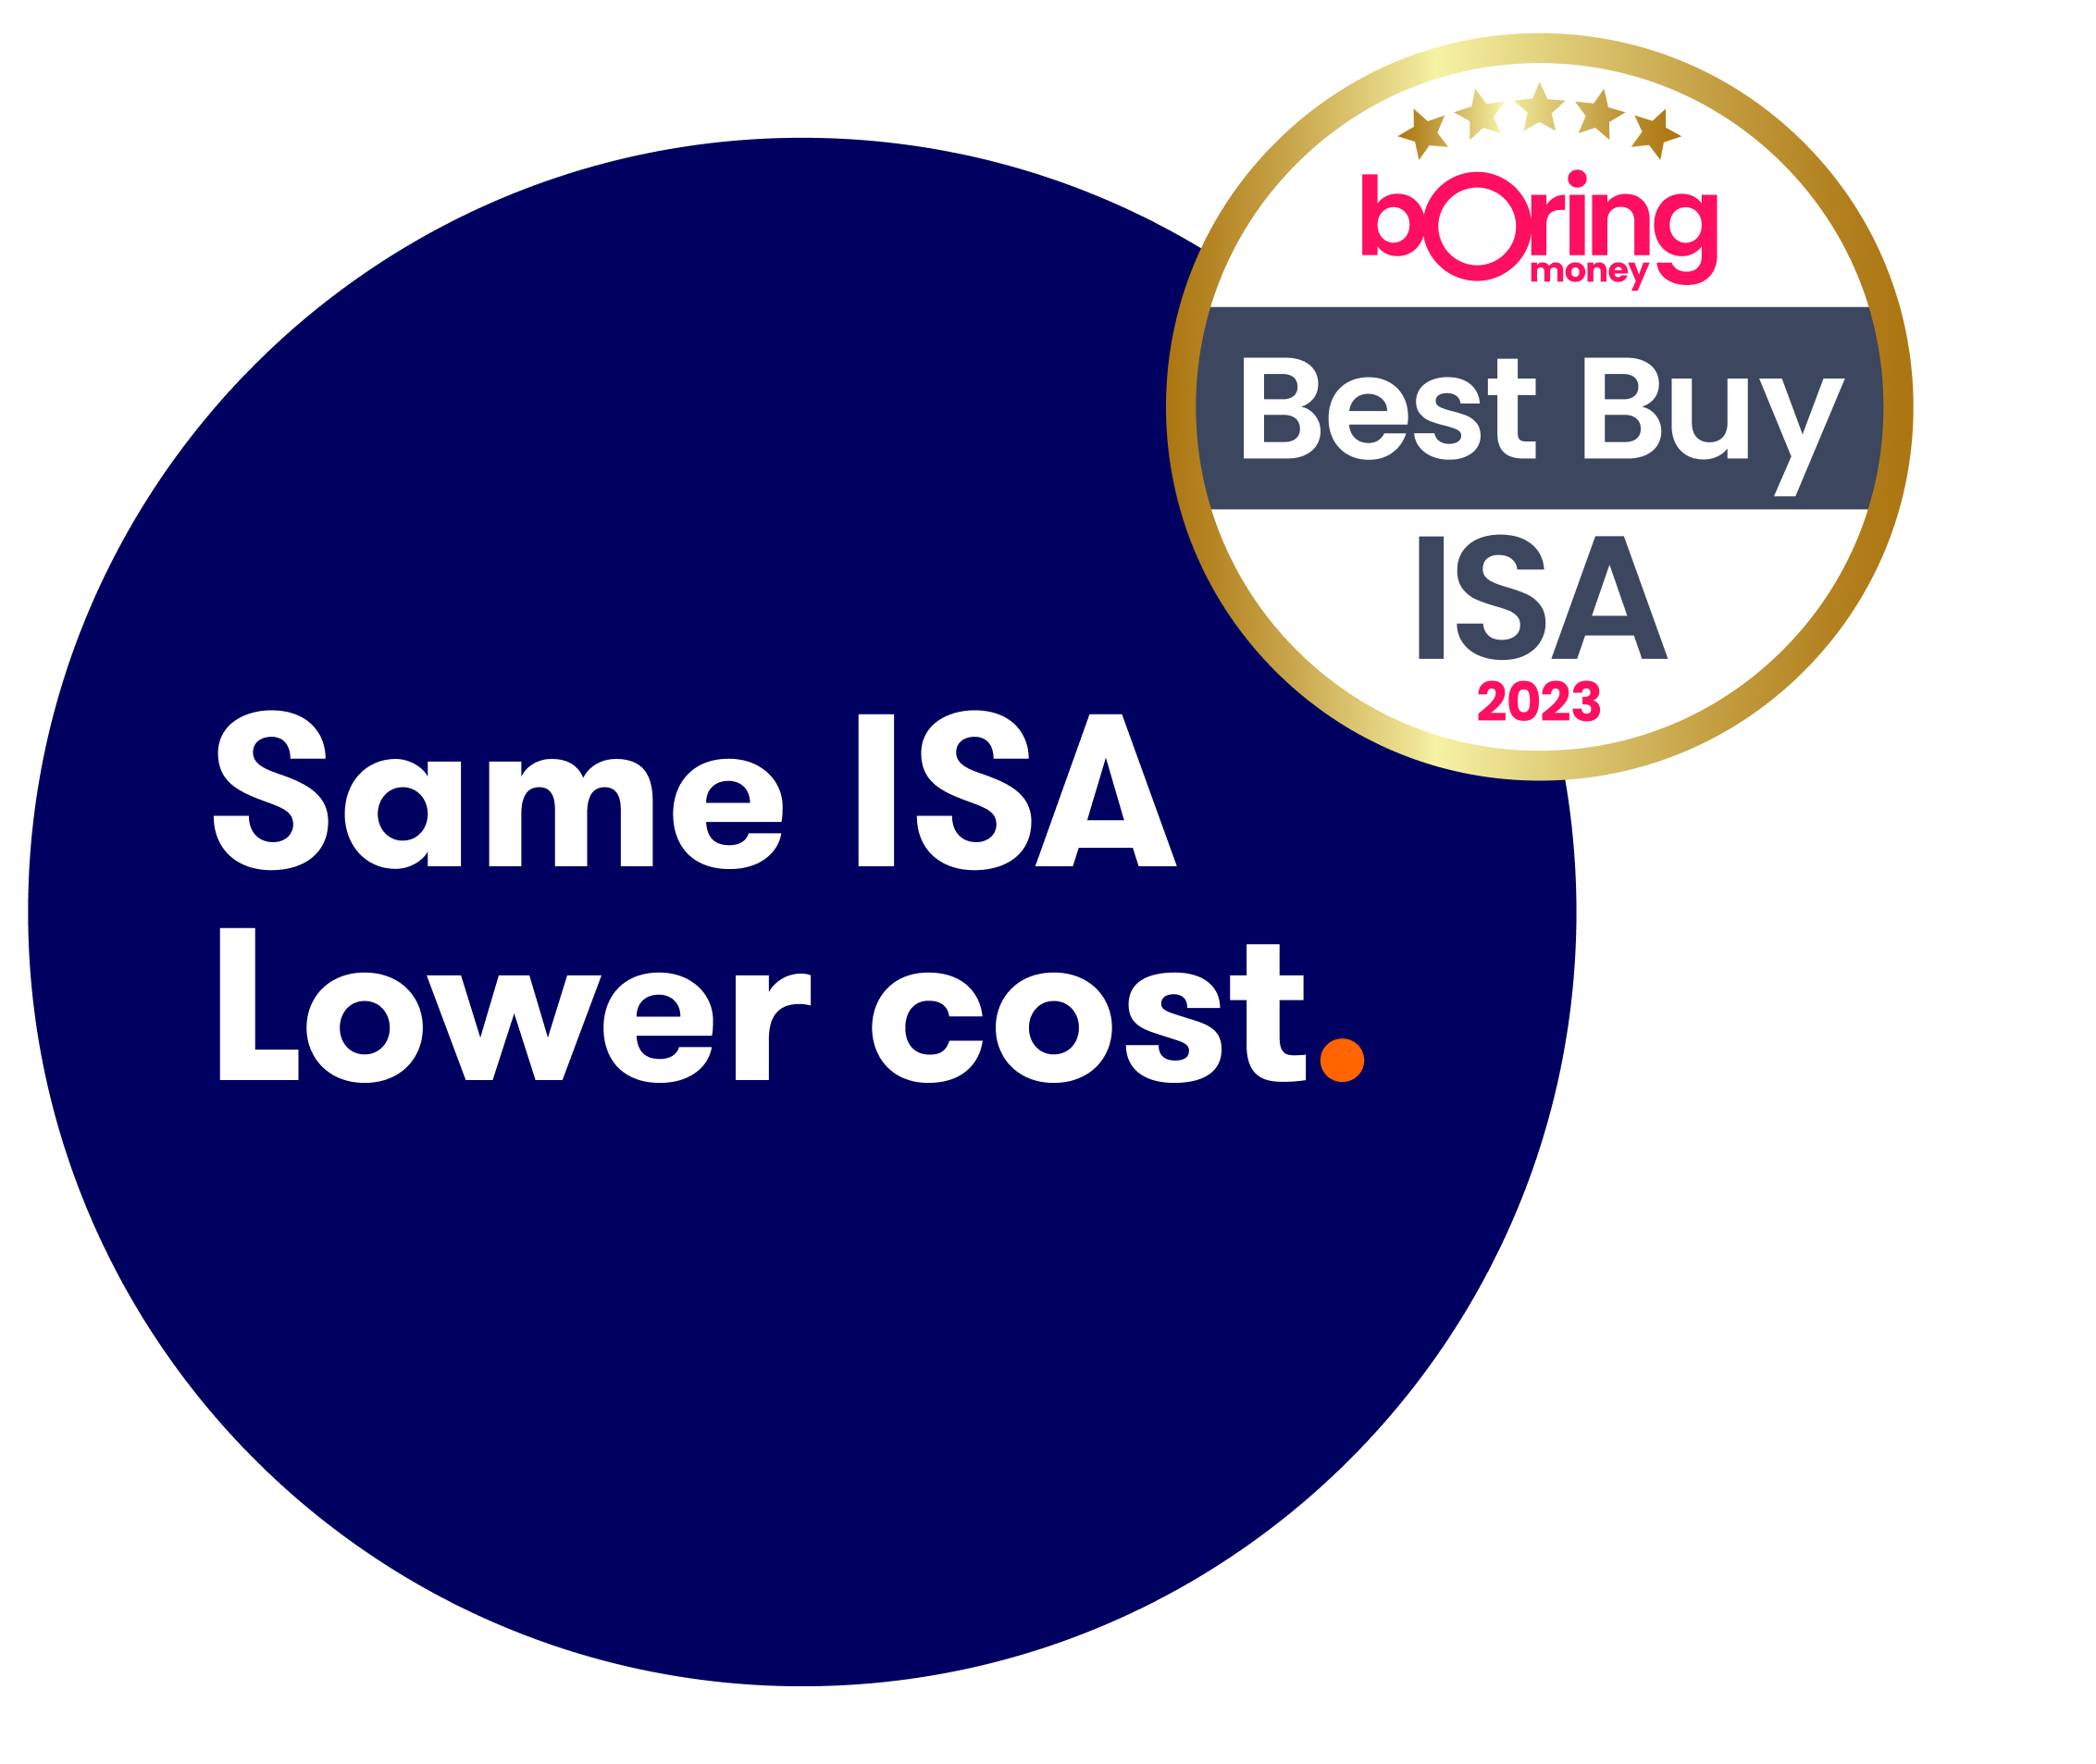 Same ISA, lower cost